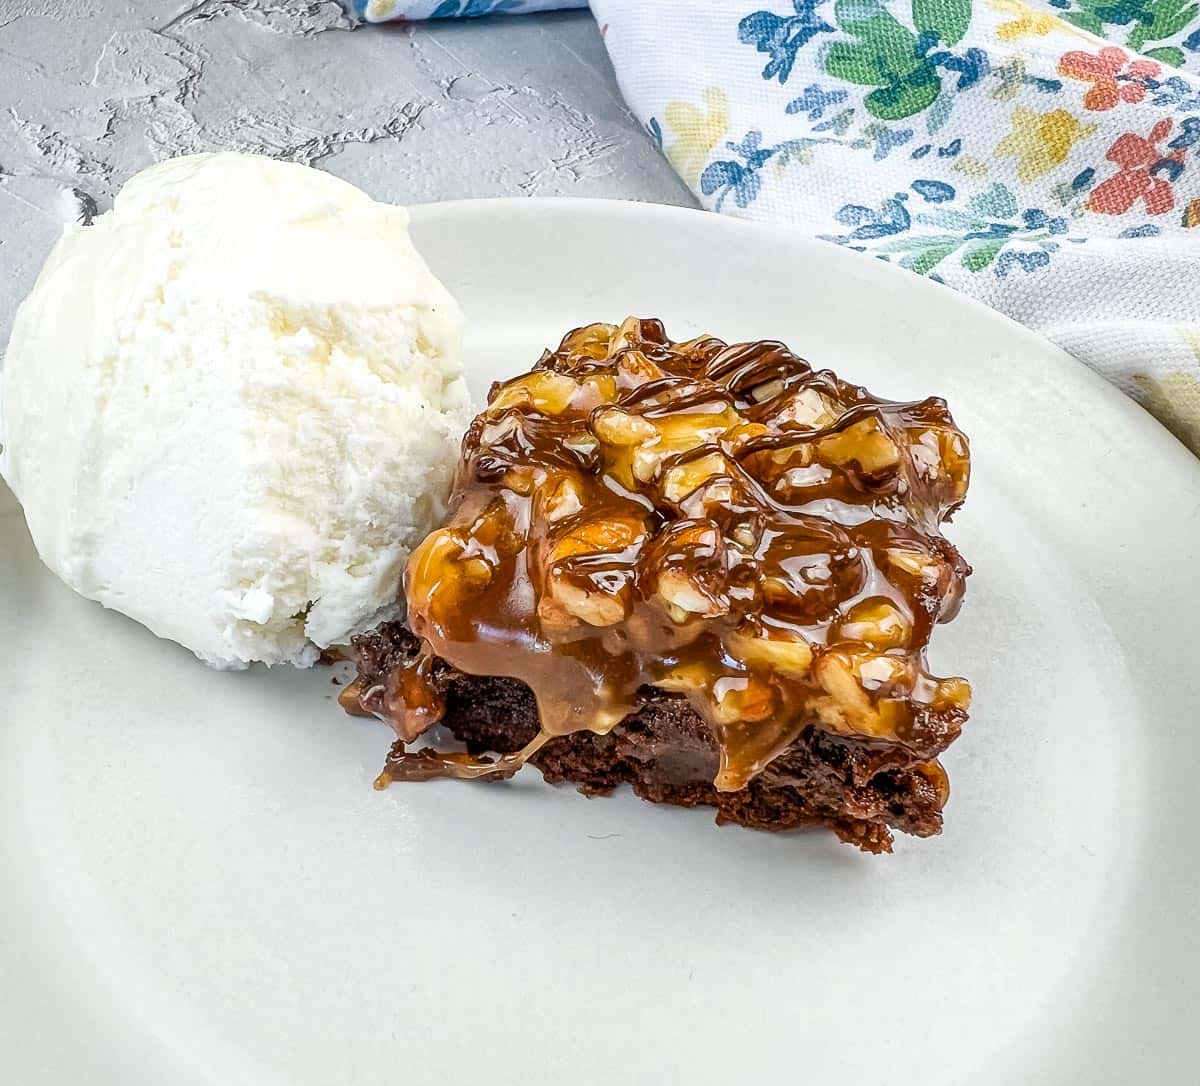 A piece of Turtle Brownie with ice cream on a plate.